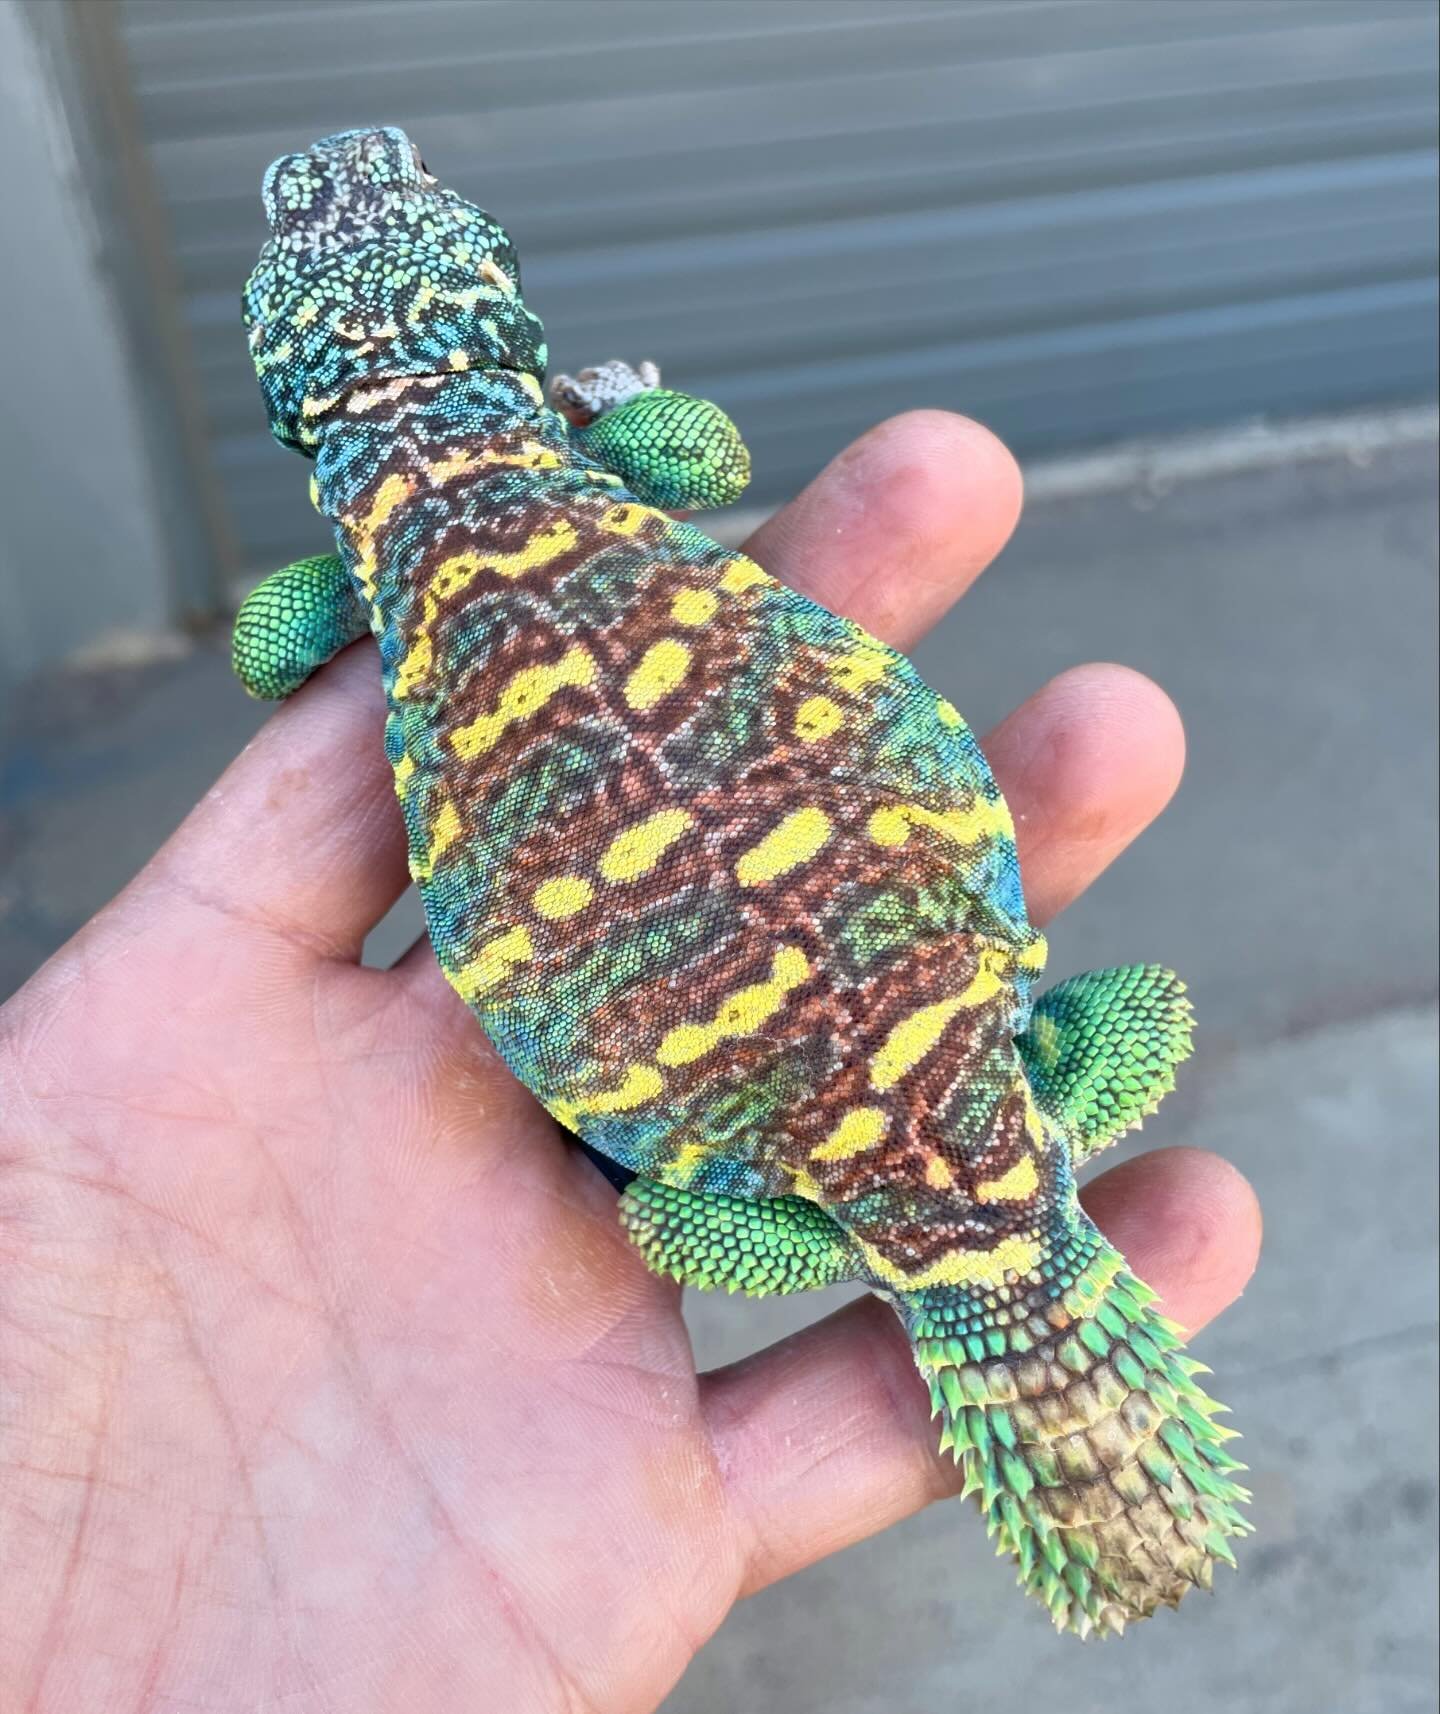 Uromastyx Ornata. All the ones pictured hatched from May-August 2023. All are males. Many are brothers or half brothers. The first animal is a 4th generation CB here at my shop. #aridsonly #lizards #lizardsofinstagram #reptiles #reptilesofinstagram #